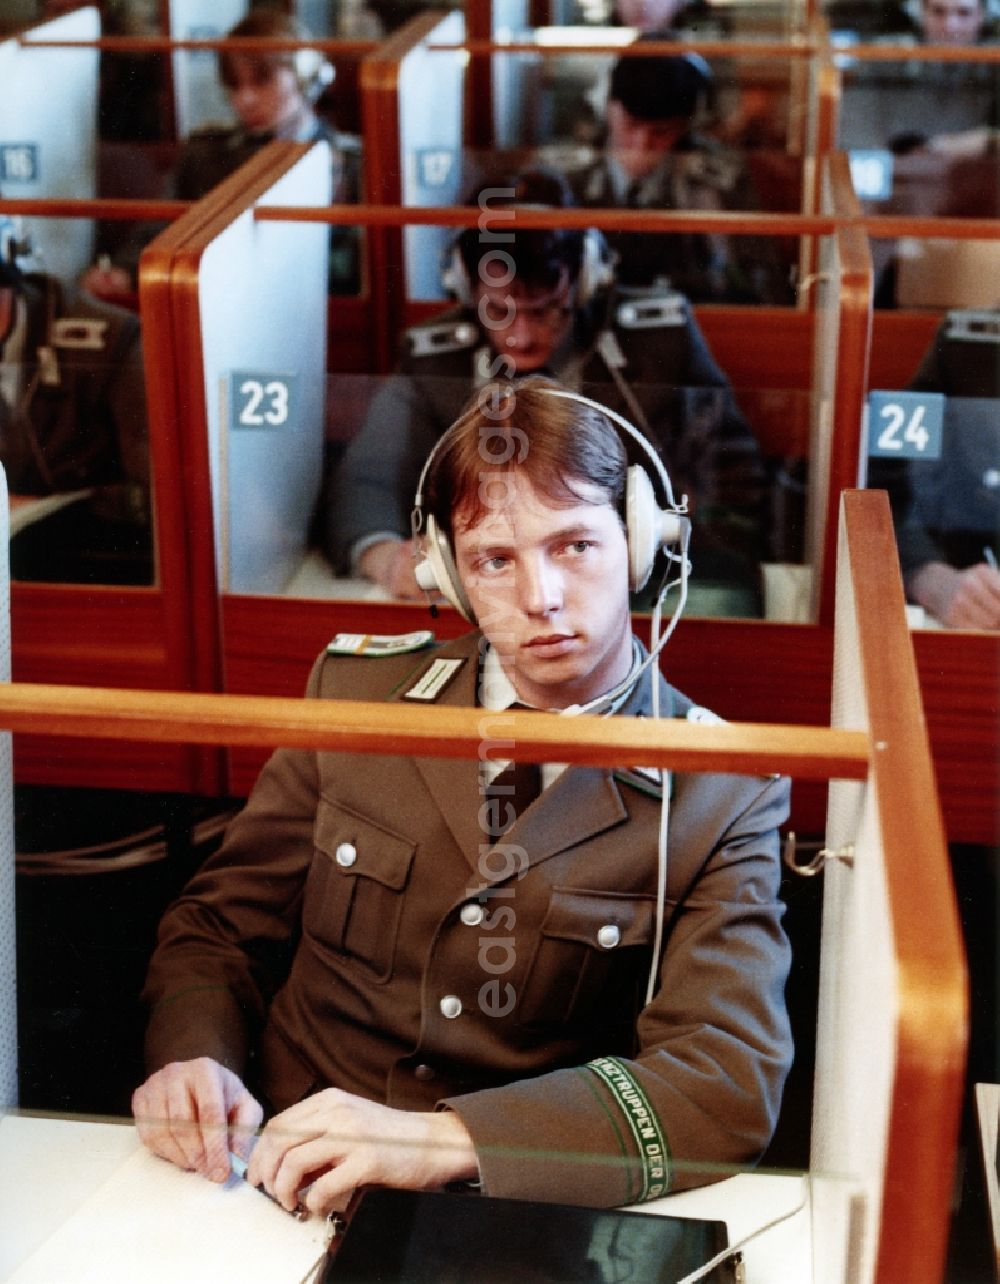 GDR image archive: Suhl - Officer training in the 3rd Year of training in the language lab of the officer school in Suhl at the East German border guards in today's state of Thuringia